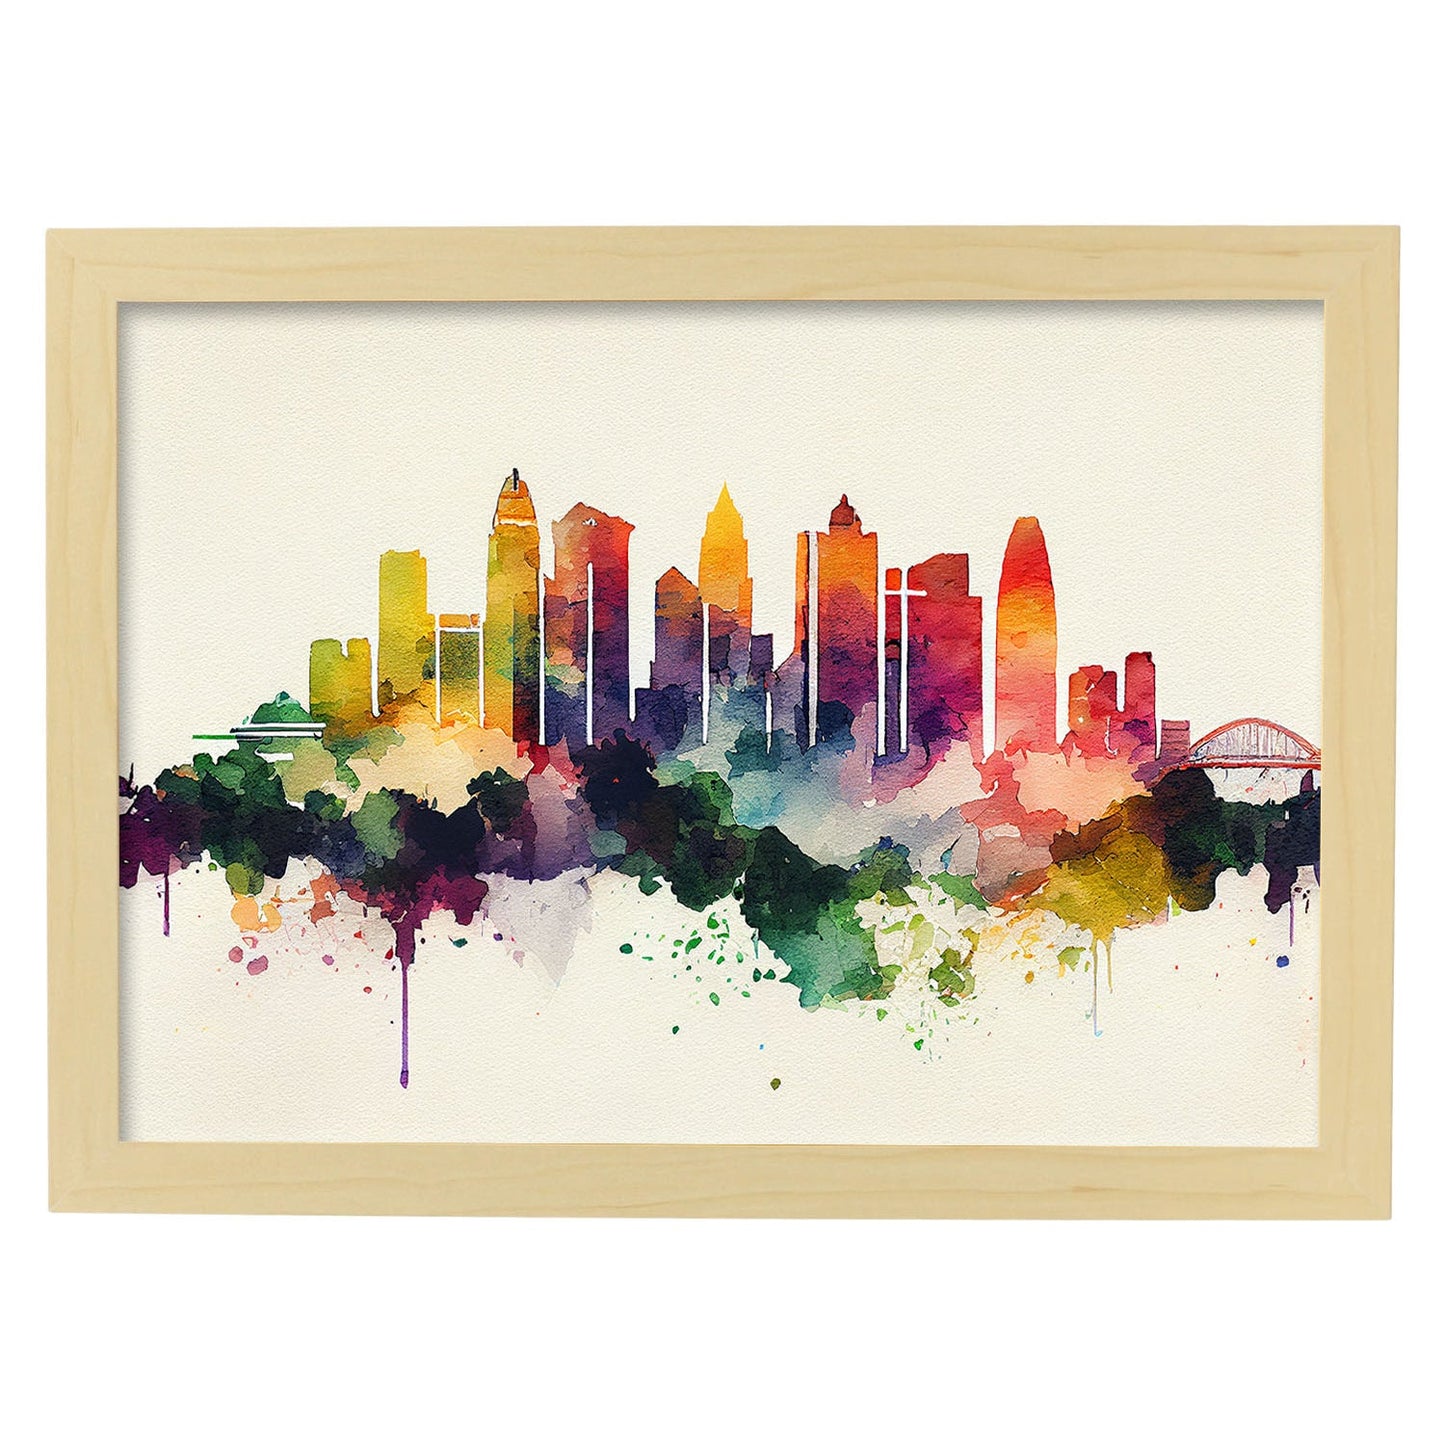 Nacnic watercolor of a skyline of the city of Singapore_4. Aesthetic Wall Art Prints for Bedroom or Living Room Design.-Artwork-Nacnic-A4-Marco Madera Clara-Nacnic Estudio SL